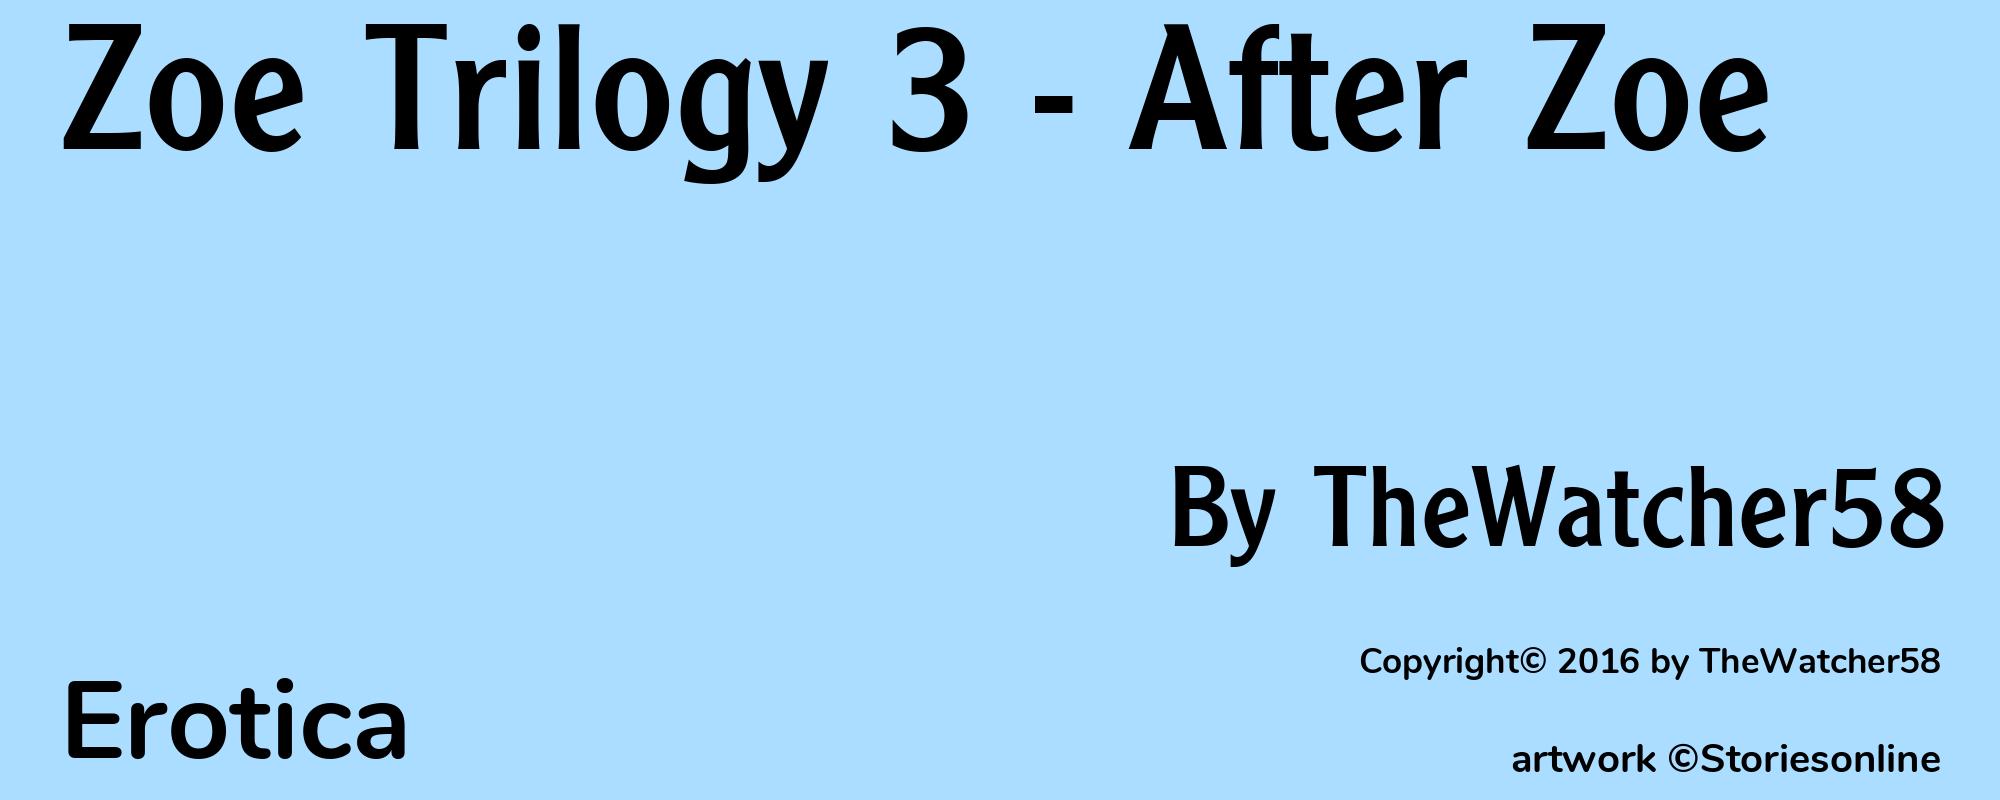 Zoe Trilogy 3 - After Zoe - Cover